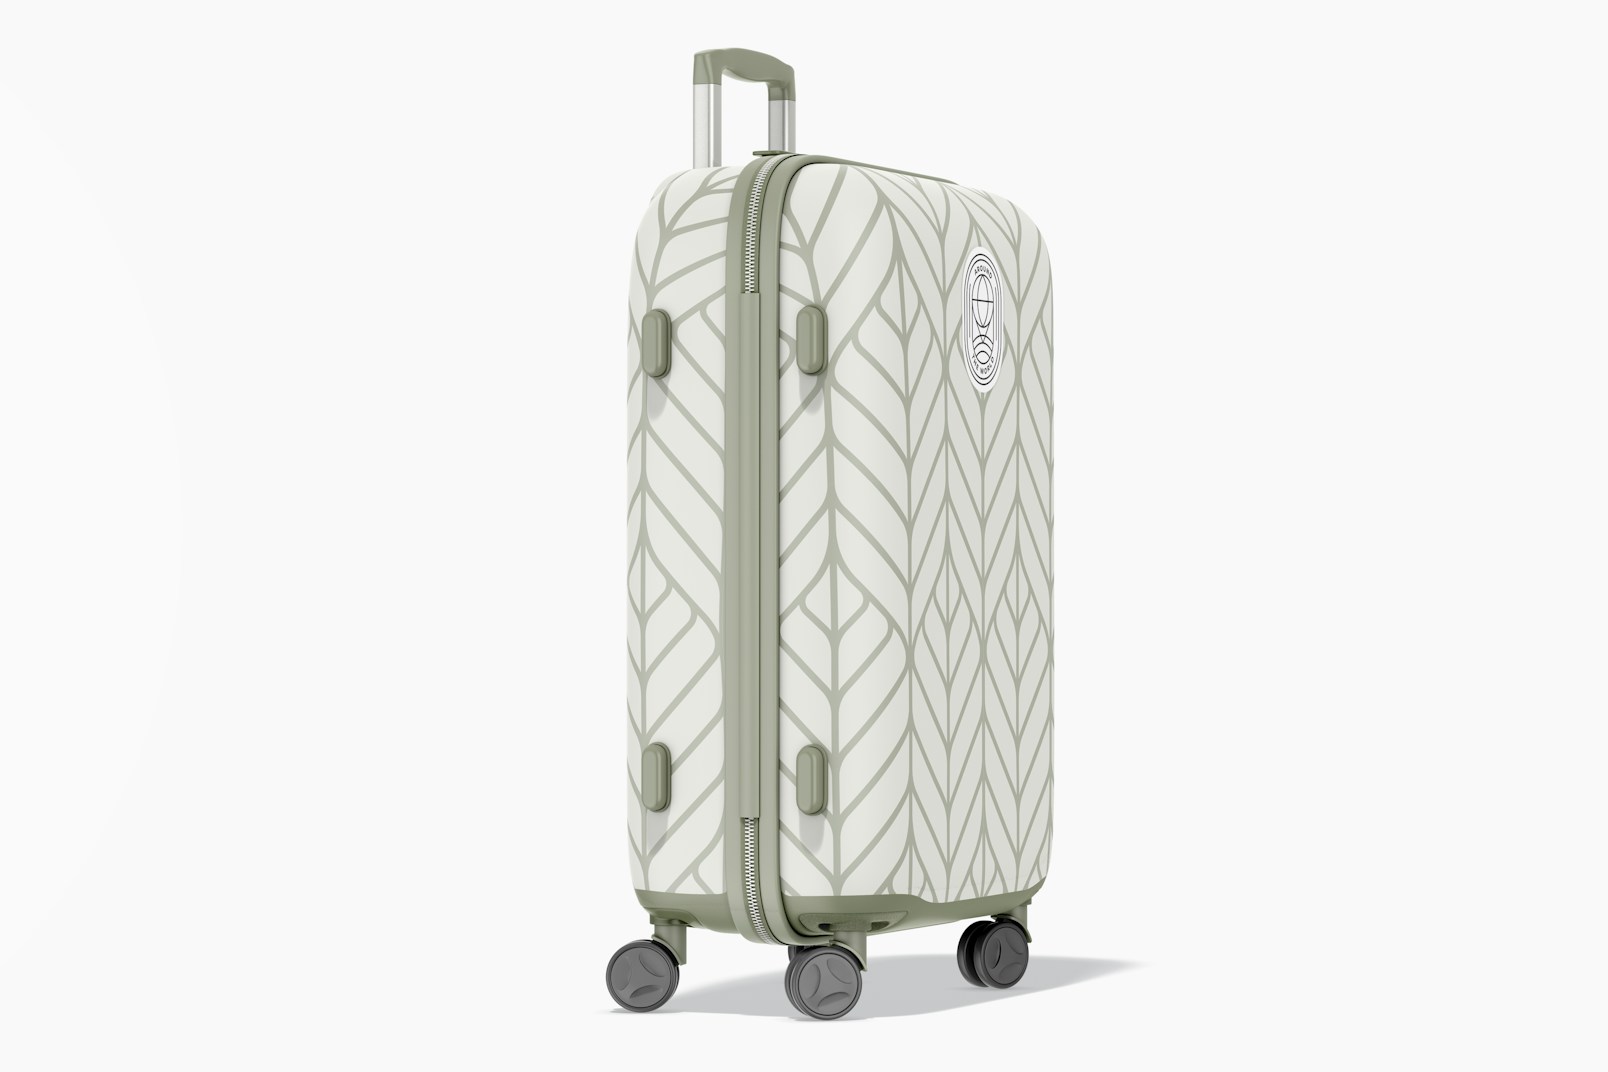 Large Suitcase Mockup, Right View